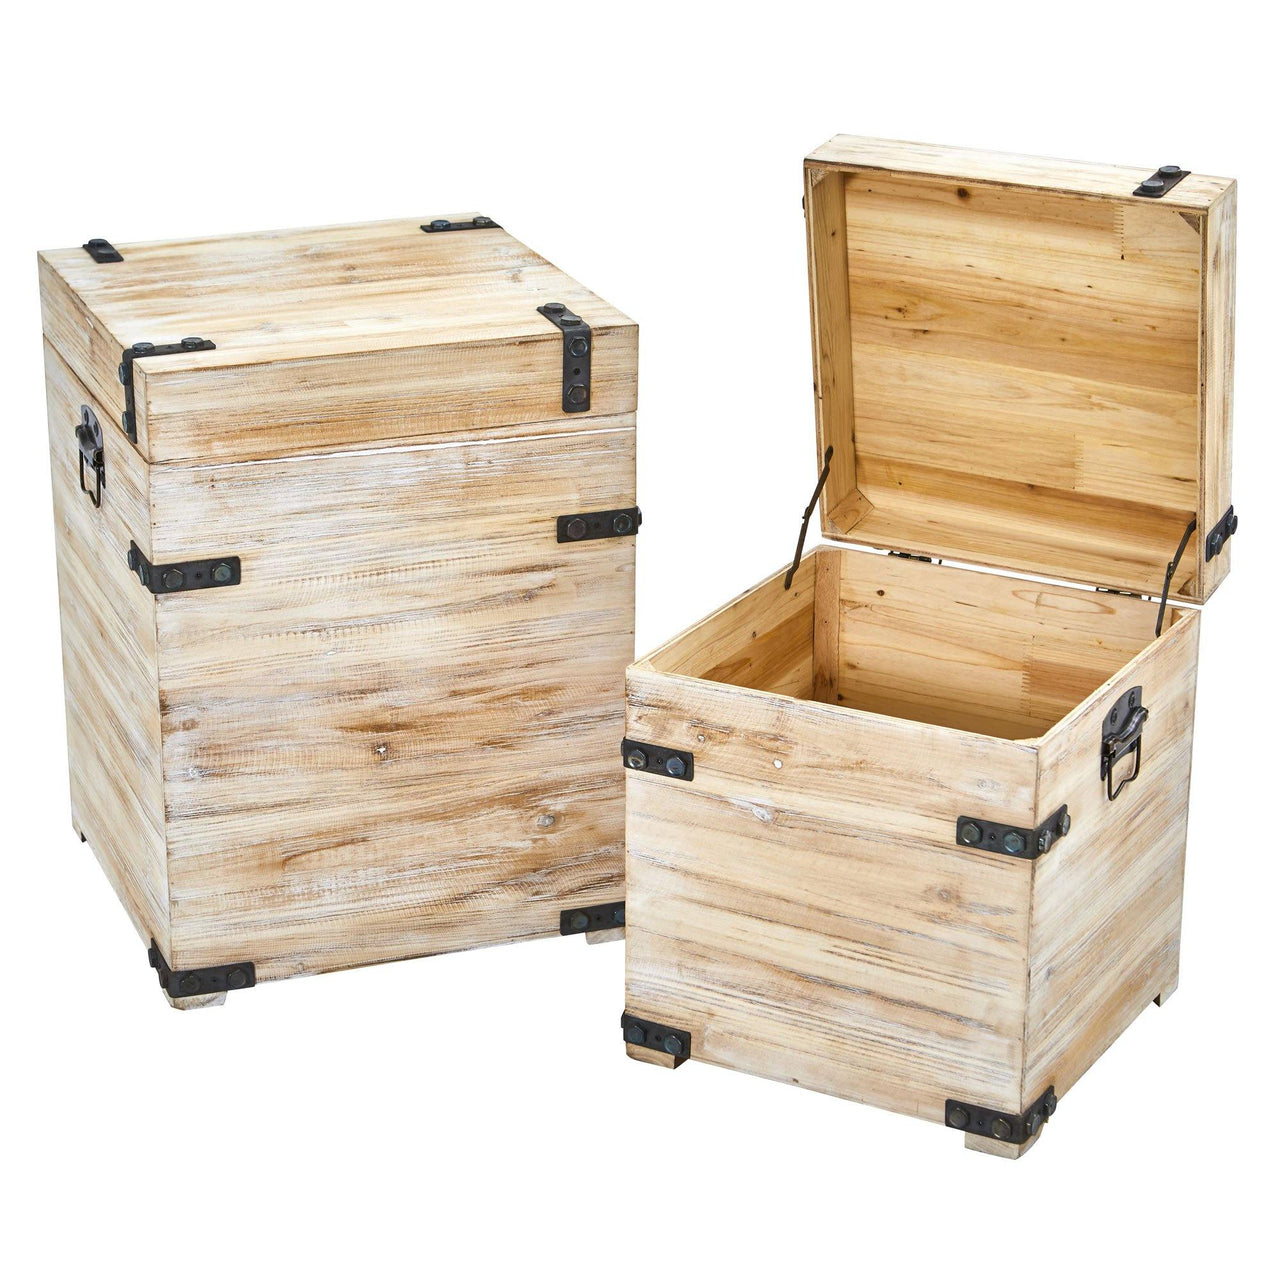 Decorative White Wash Storage Boxes-Trunks With Metal Detail (Set Of 2) - The Fox Decor